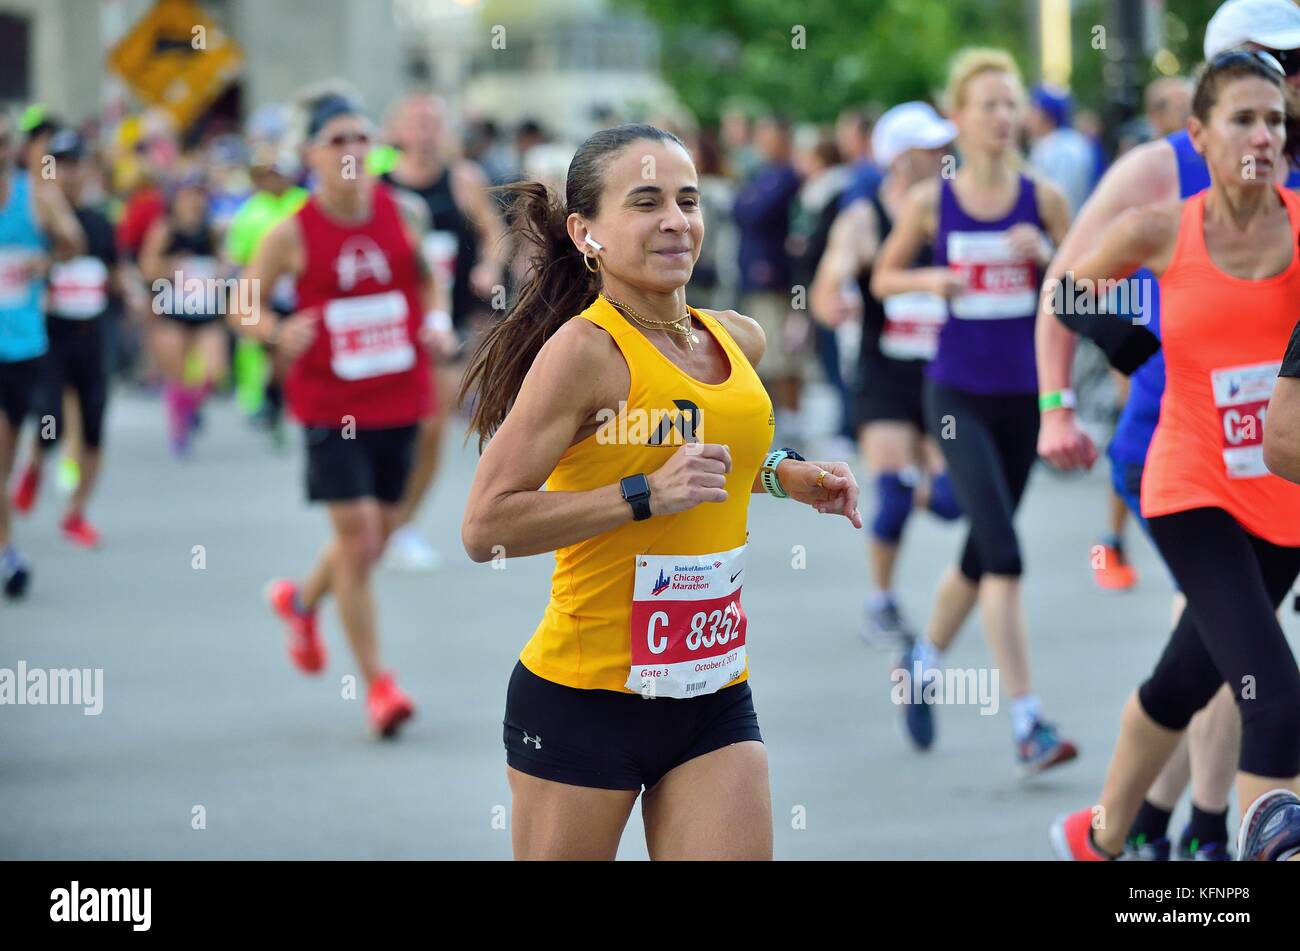 Nanci Salvo of Brazil running among a cluster of competitors during the early stages of the 2017 Chicago Marathon. Chicago, Illinois, USA. Stock Photo